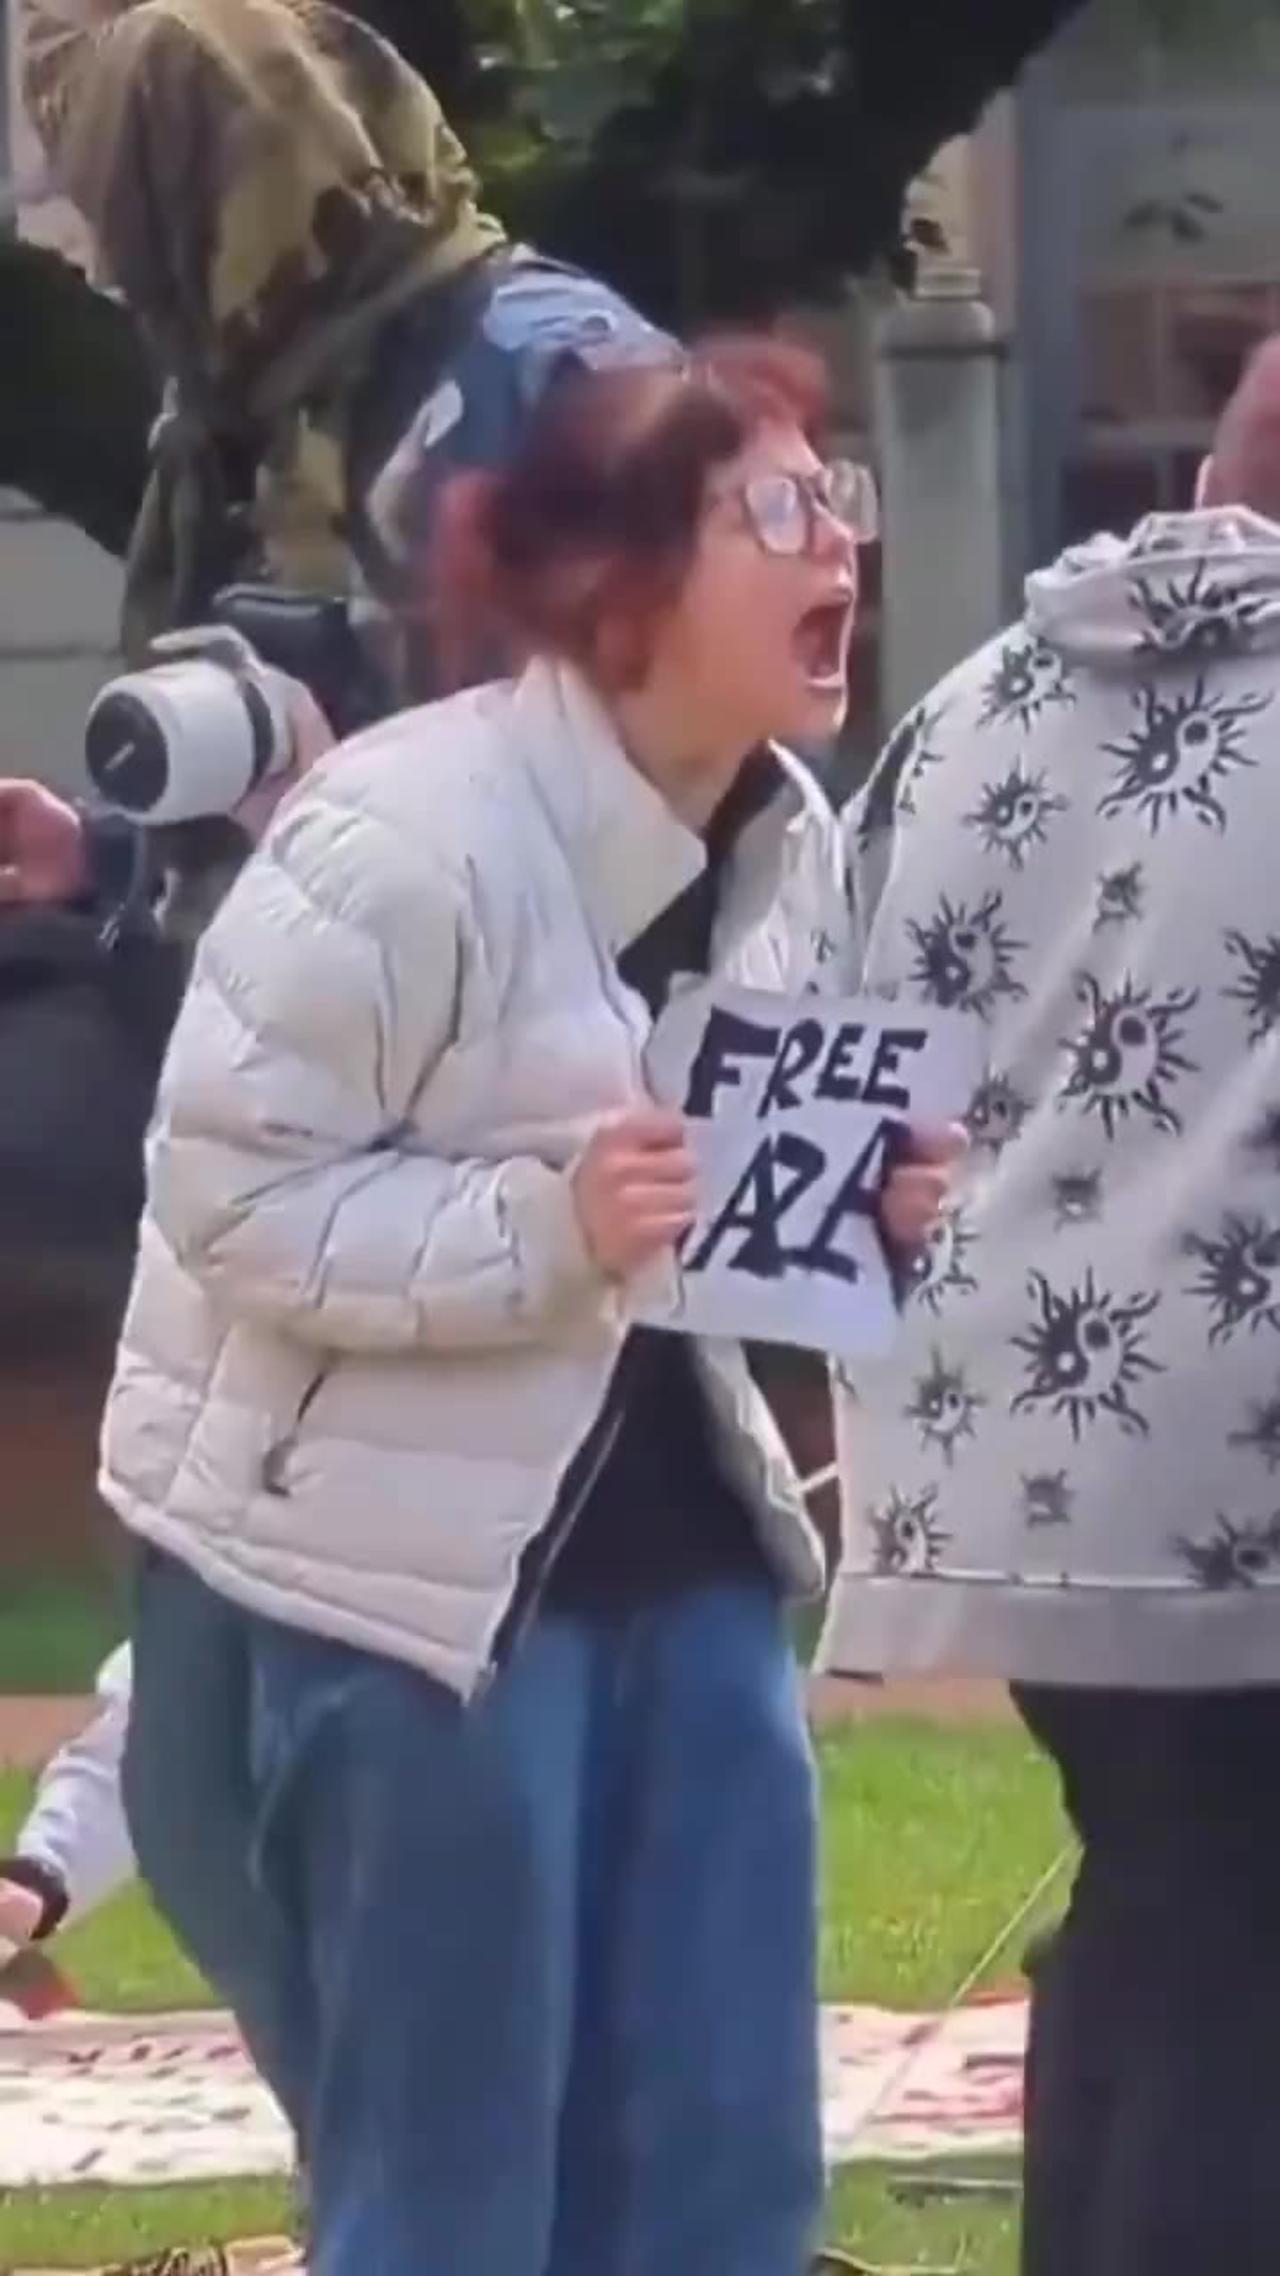 Free Gaza activist screams like a rabid animal after being triggered by an Israeli flag